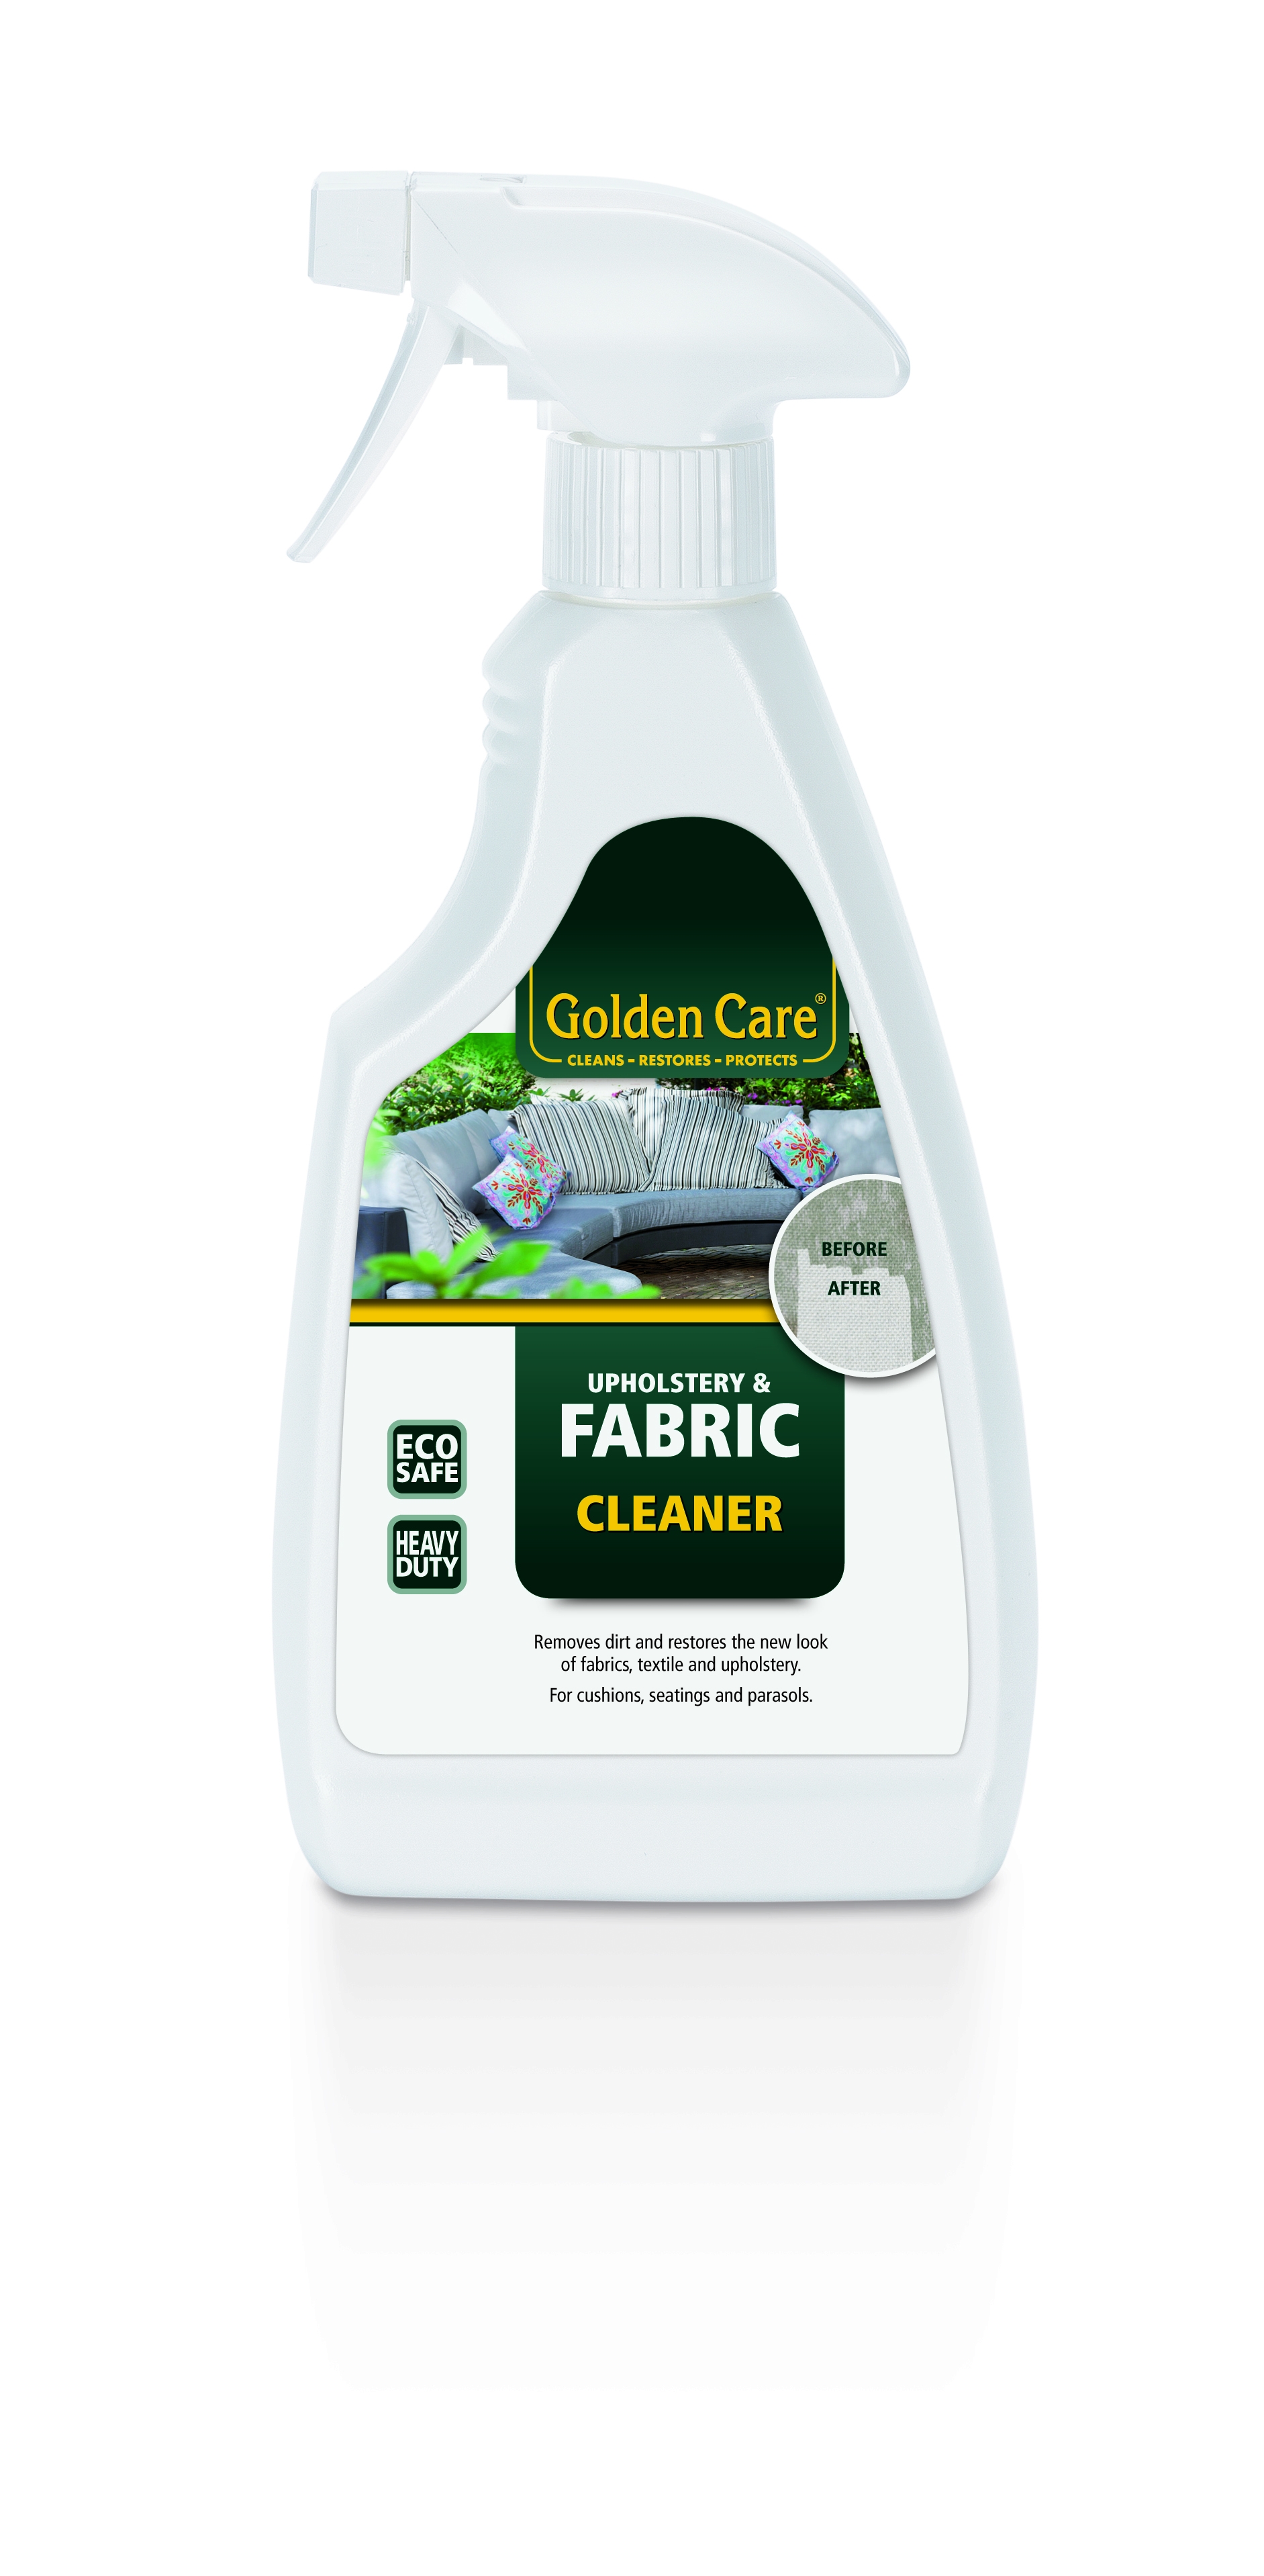 Golden Care Fabric & Upholstery Cleaner - 24 ounce